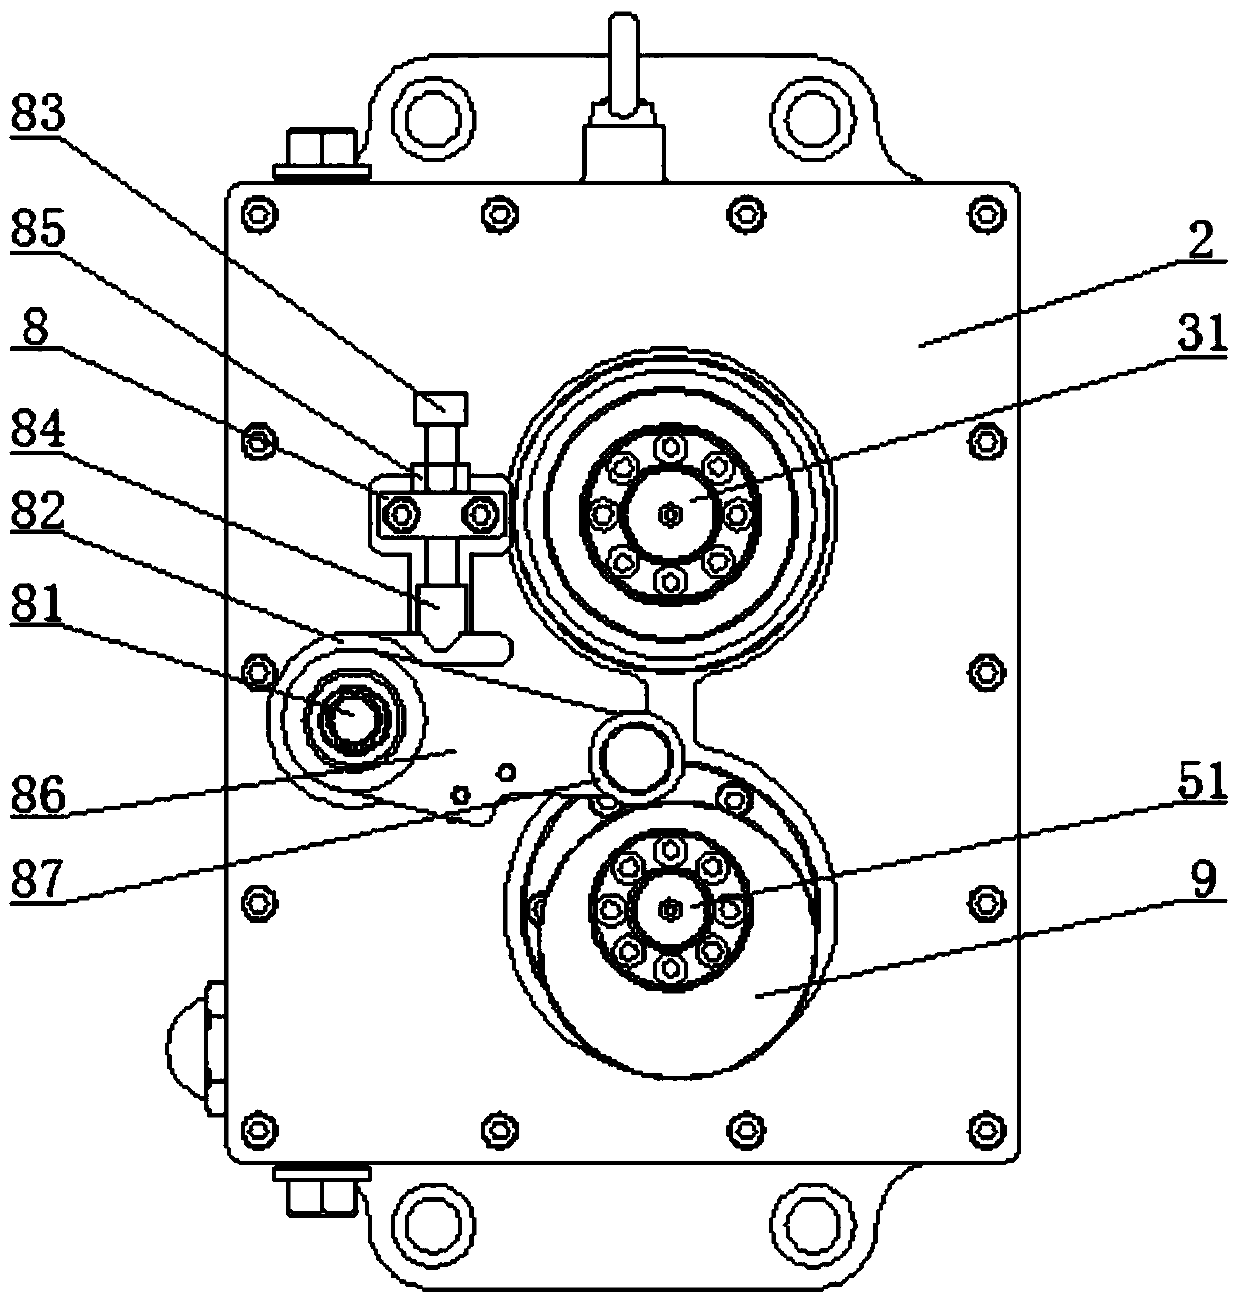 Gearbox of speed changing mechanism